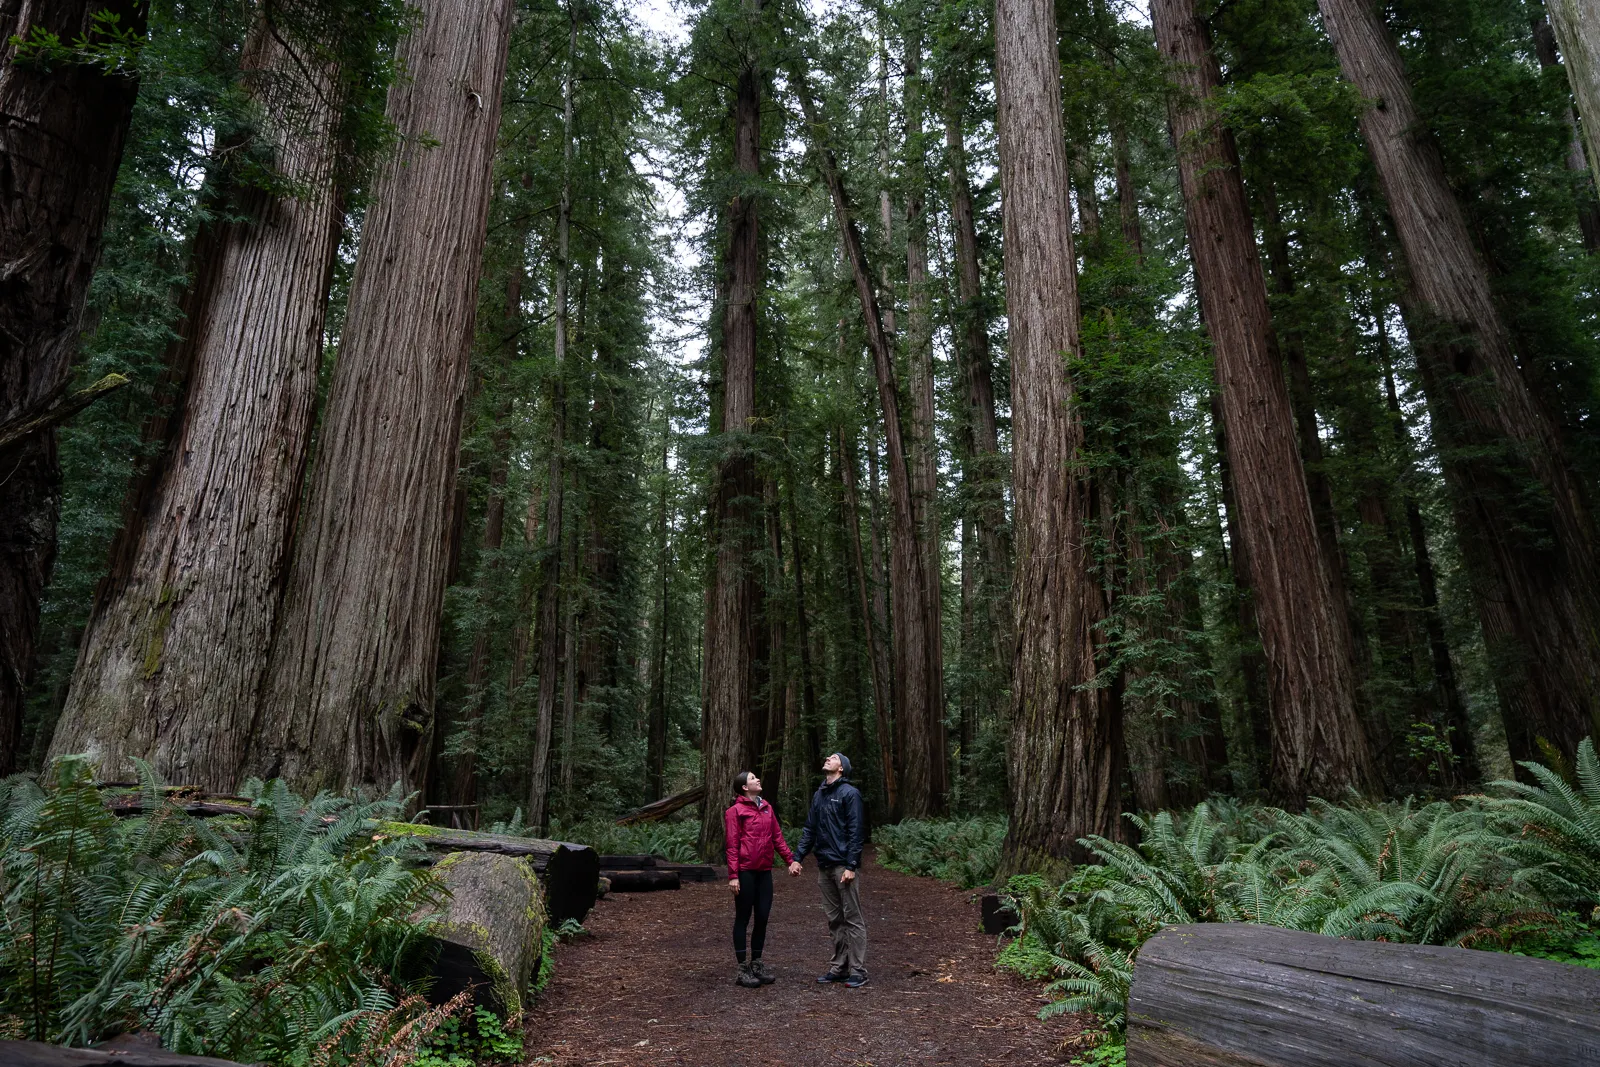 The ULTIMATE Guide to visiting Redwood National Park (+ state parks!) in California